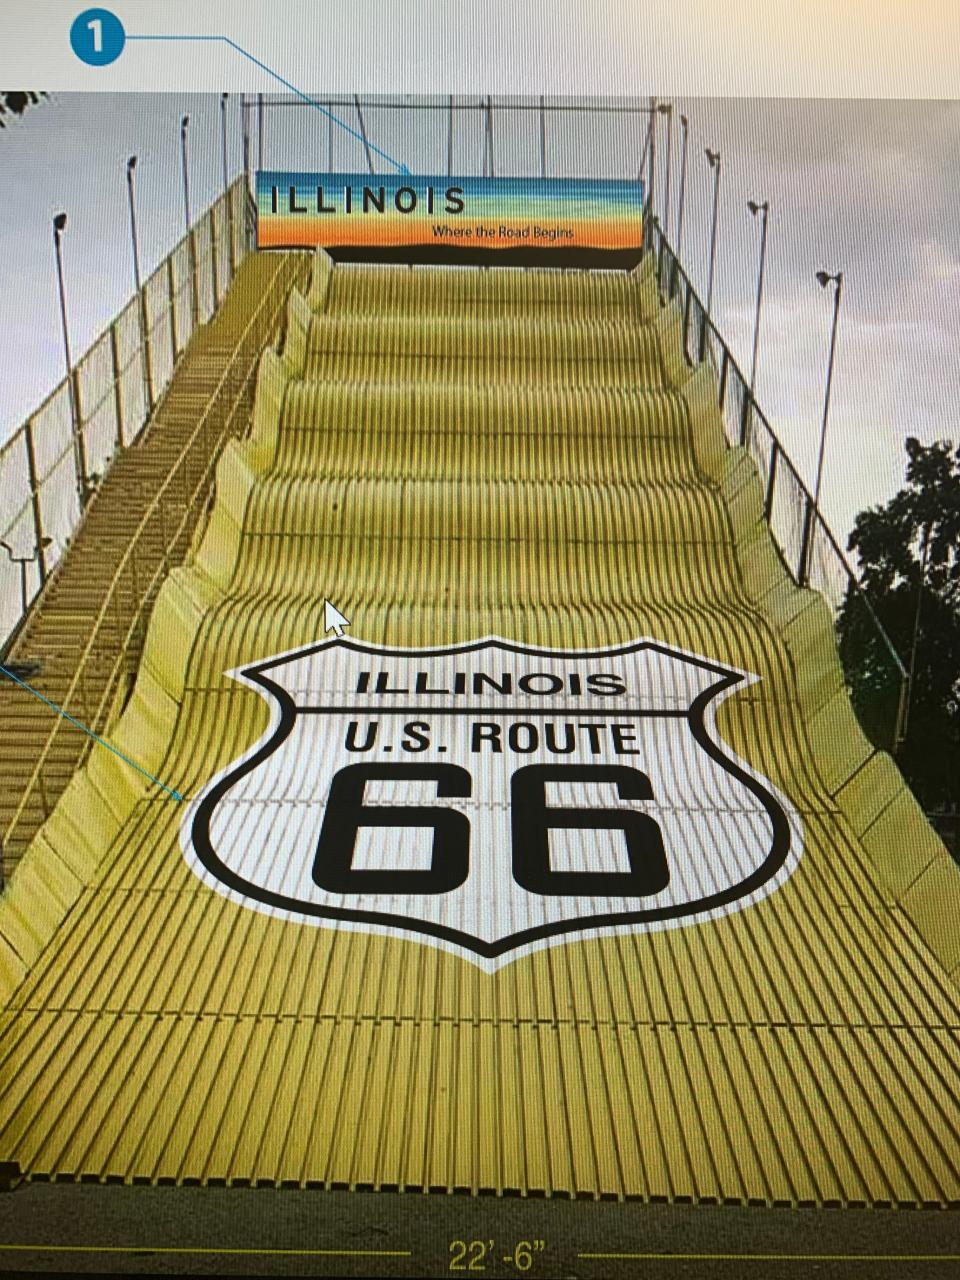 This is a prototype of the Route 66 logo the Springfield Convention and Visitors Bureau is looking to add to the Giant Slide at the Illinois State Fairgrounds. Doug Knight of Springfield finalized the purchase of the slide on Saturday. The SCVB will begin a promotional campaign around the slide in anticipation of the centennial of Route 66 in 2026.